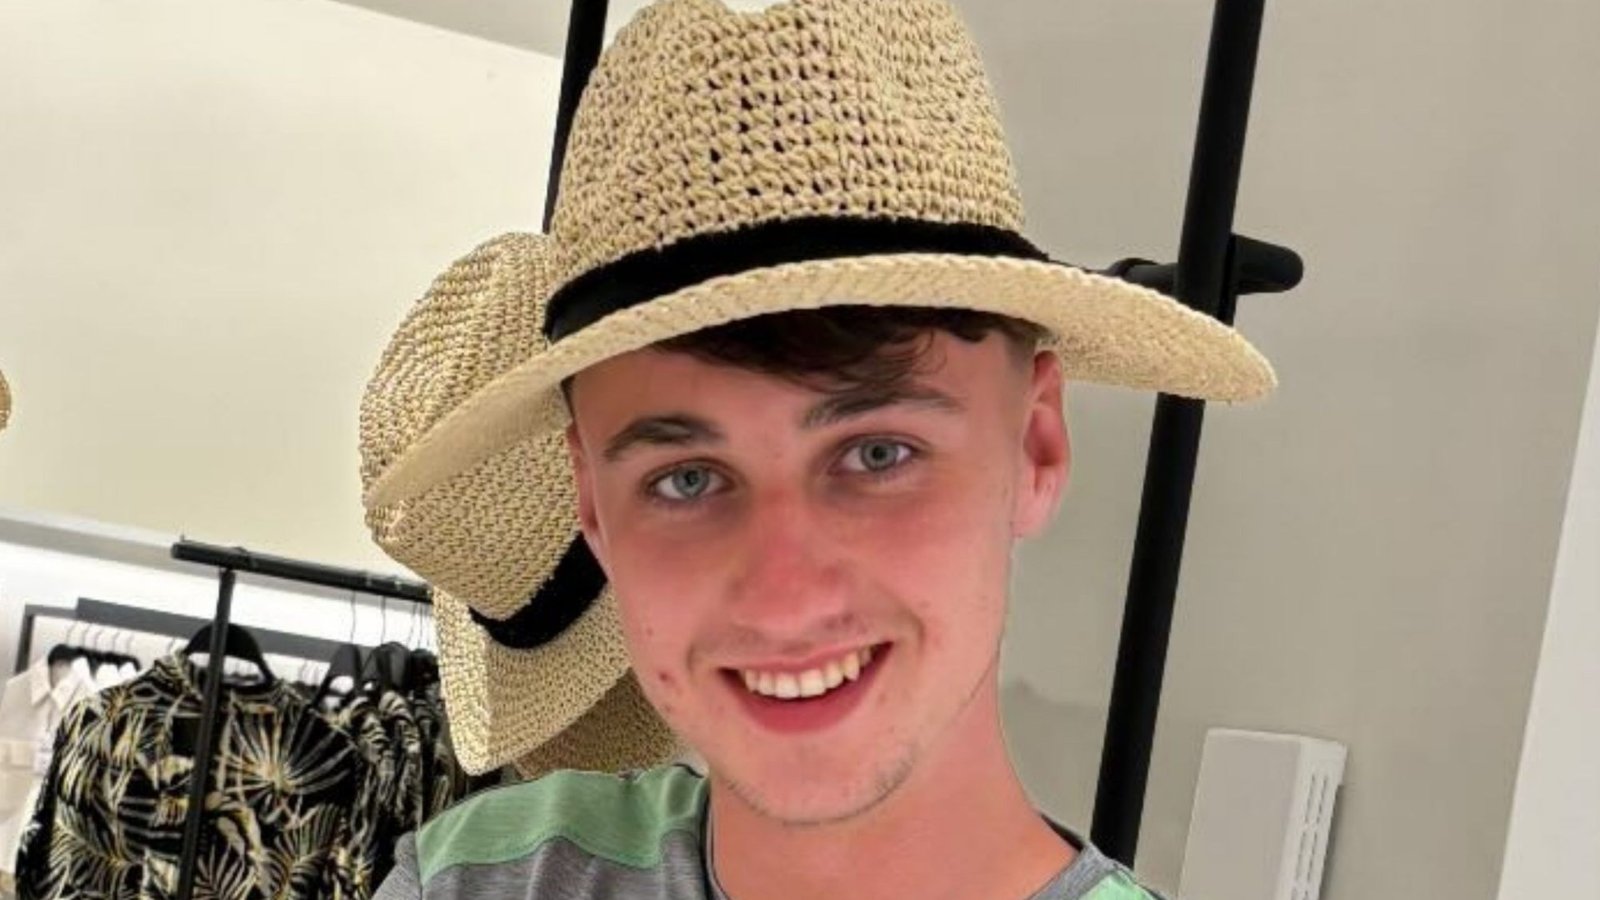 Friend of Jay Slater missing in Tenerife claims teen ‘cut his leg on a cactus’ and ‘needed a drink’ in final phone call